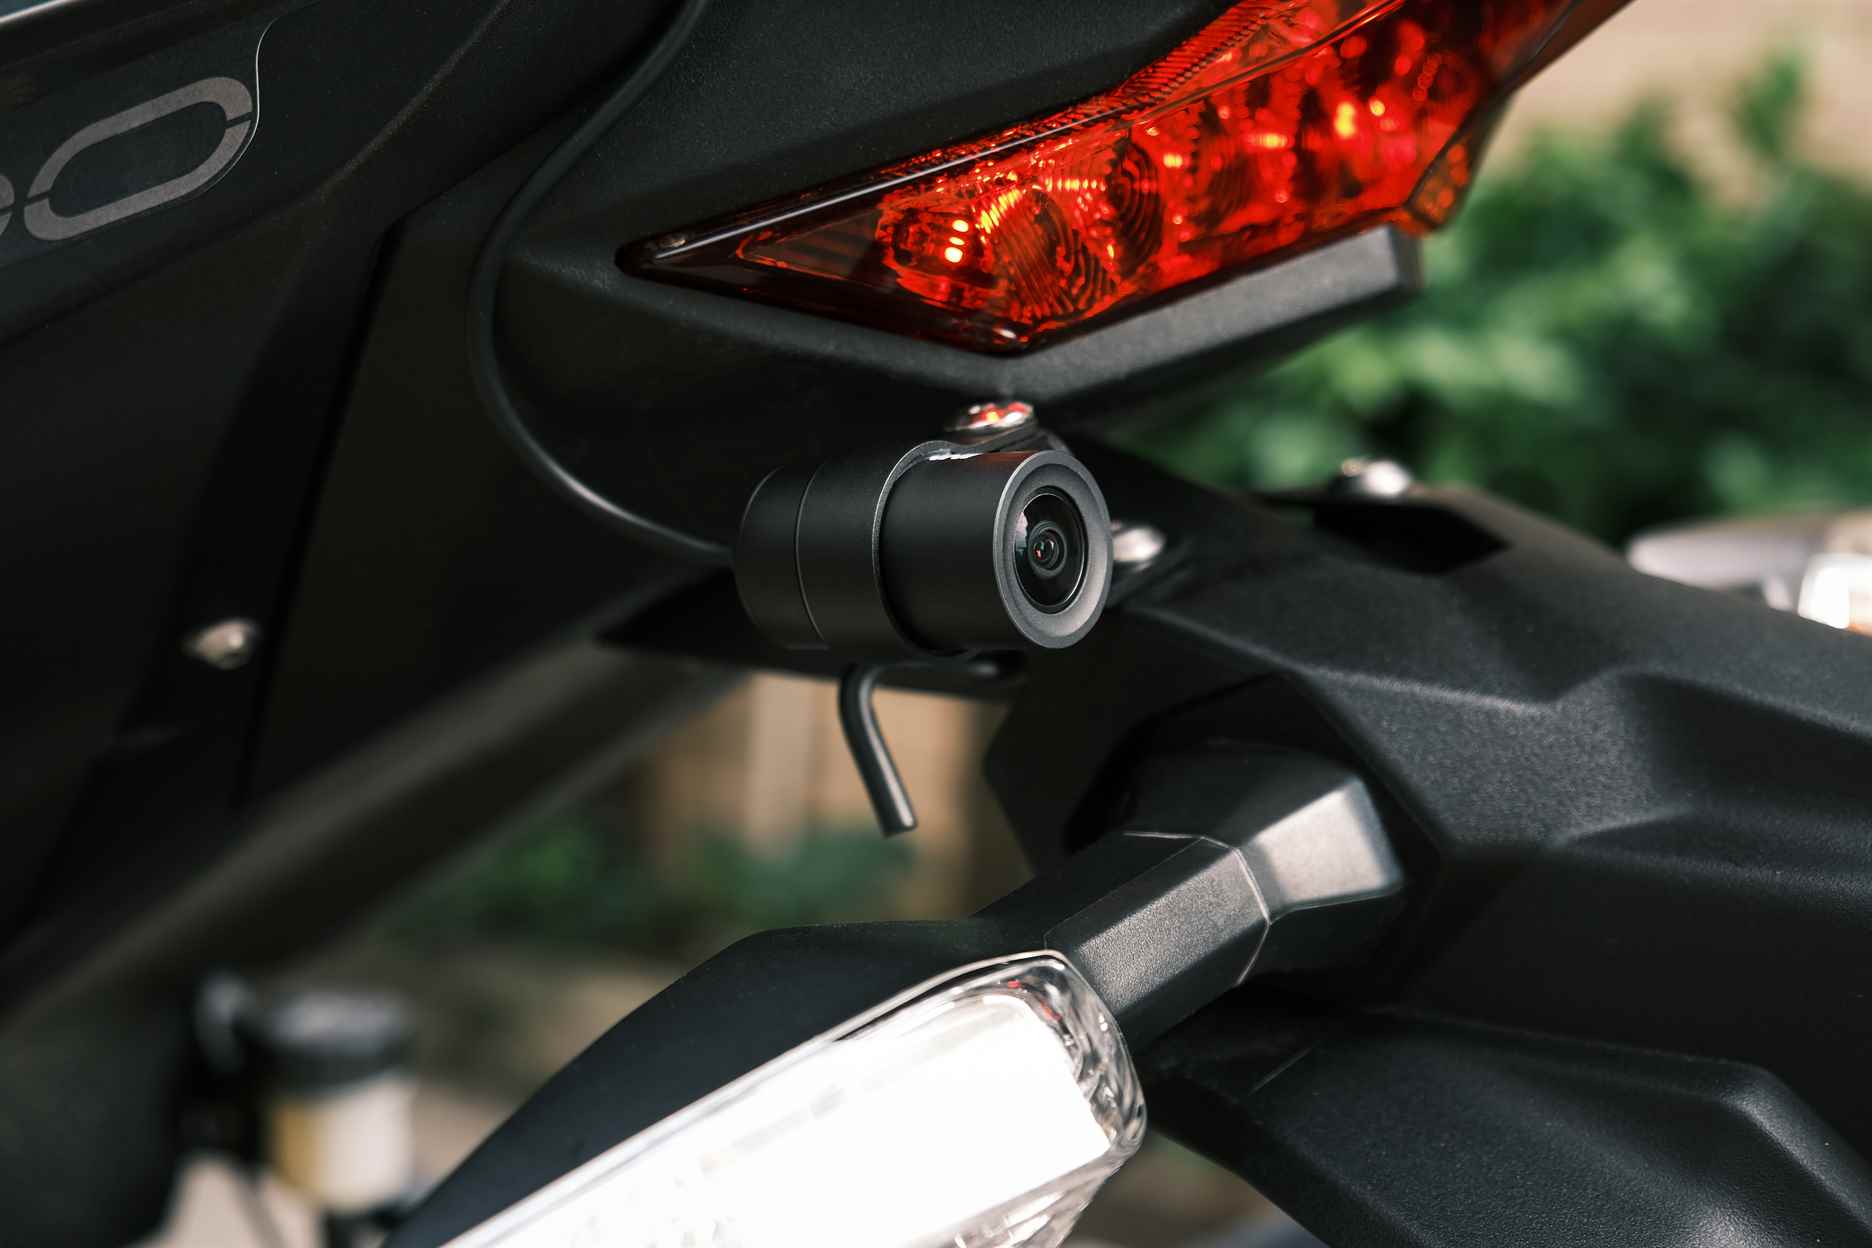 Close-up of a motorcycle's rear with a focus on the taillight and a mounted action camera.